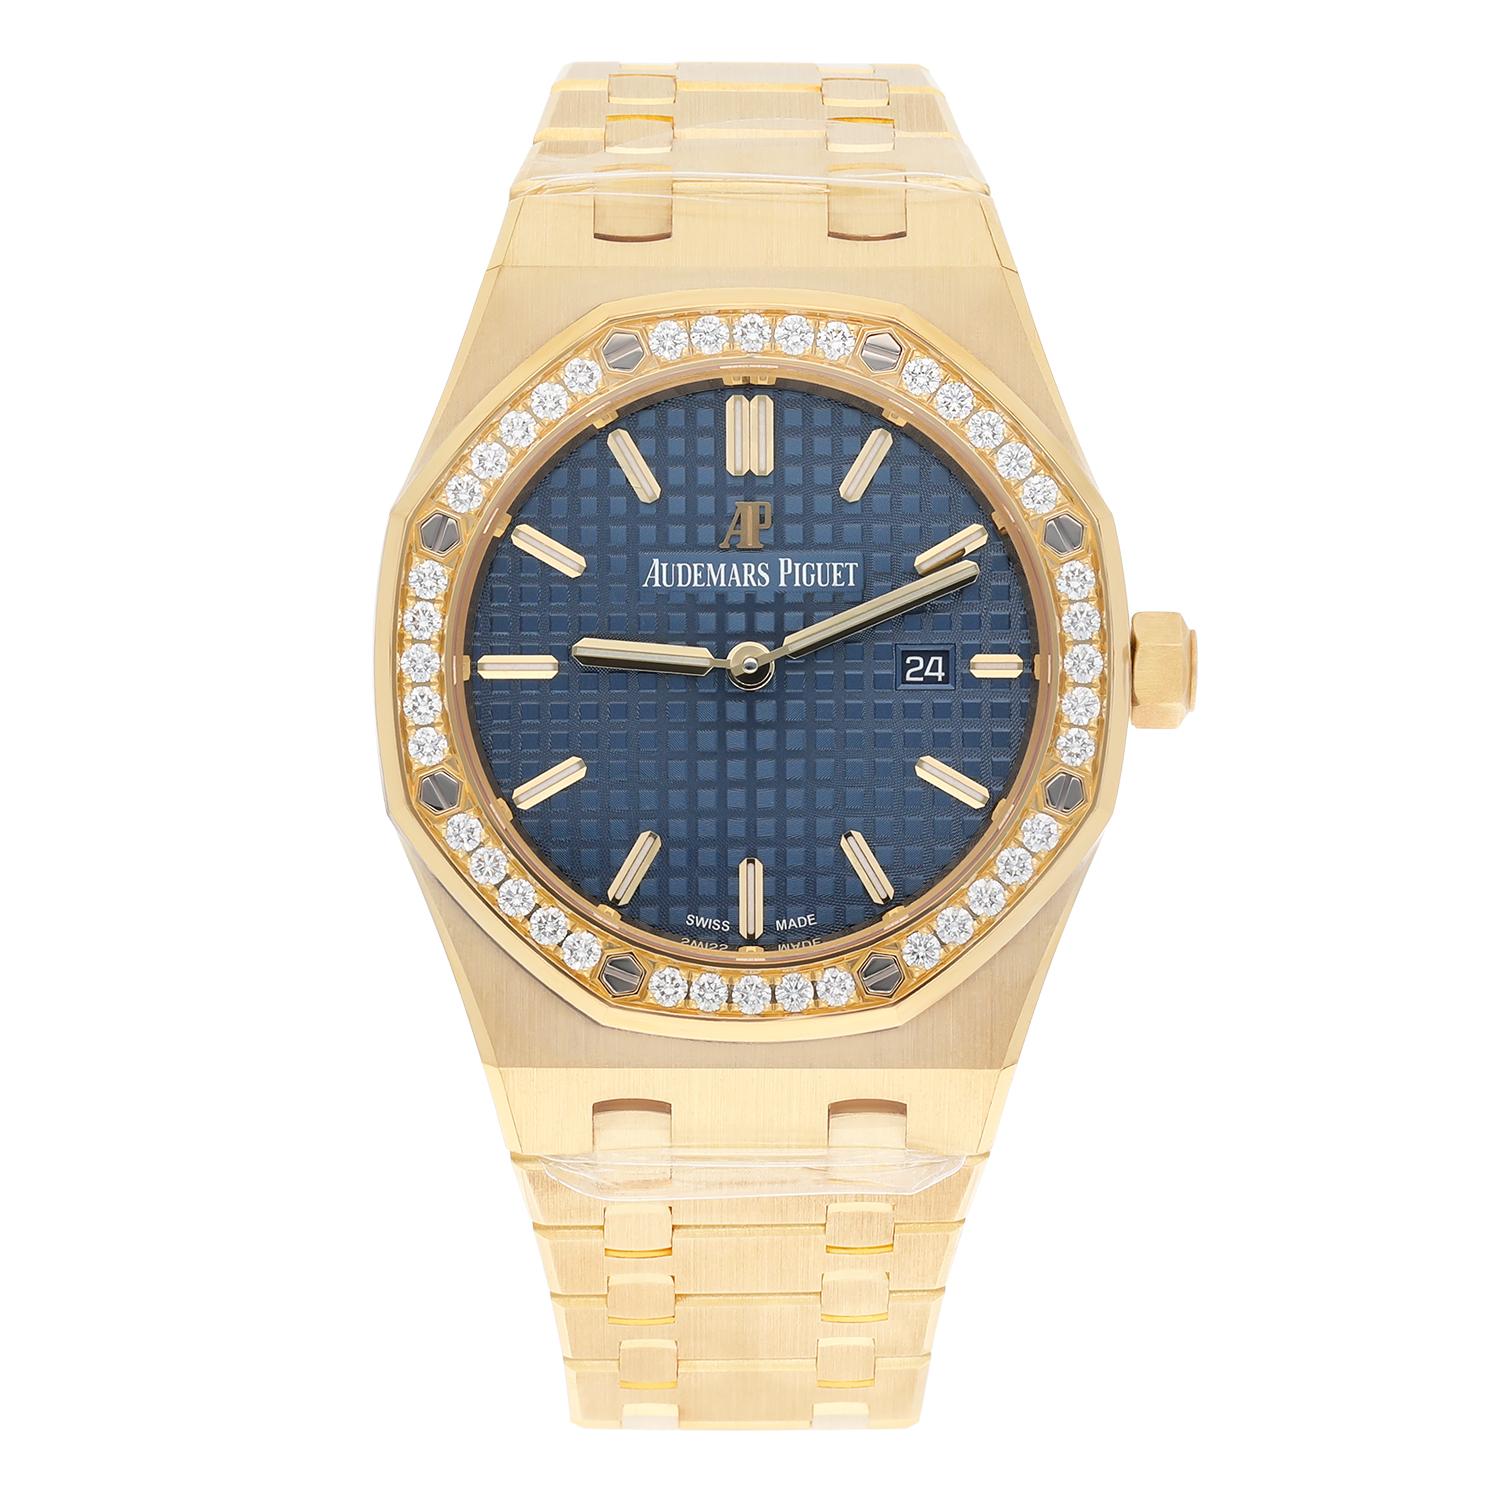 Truly NEW Audemars Piguet Royal Oak 33 Blue Dial Yellow Gold Diamond 67651BA.ZZ.1261BA.02 Ladies Watch
Complete with original box and original papers.

Brushed finished 18kt yellow gold case & bracelet with polished bevel corners. Bezel polished